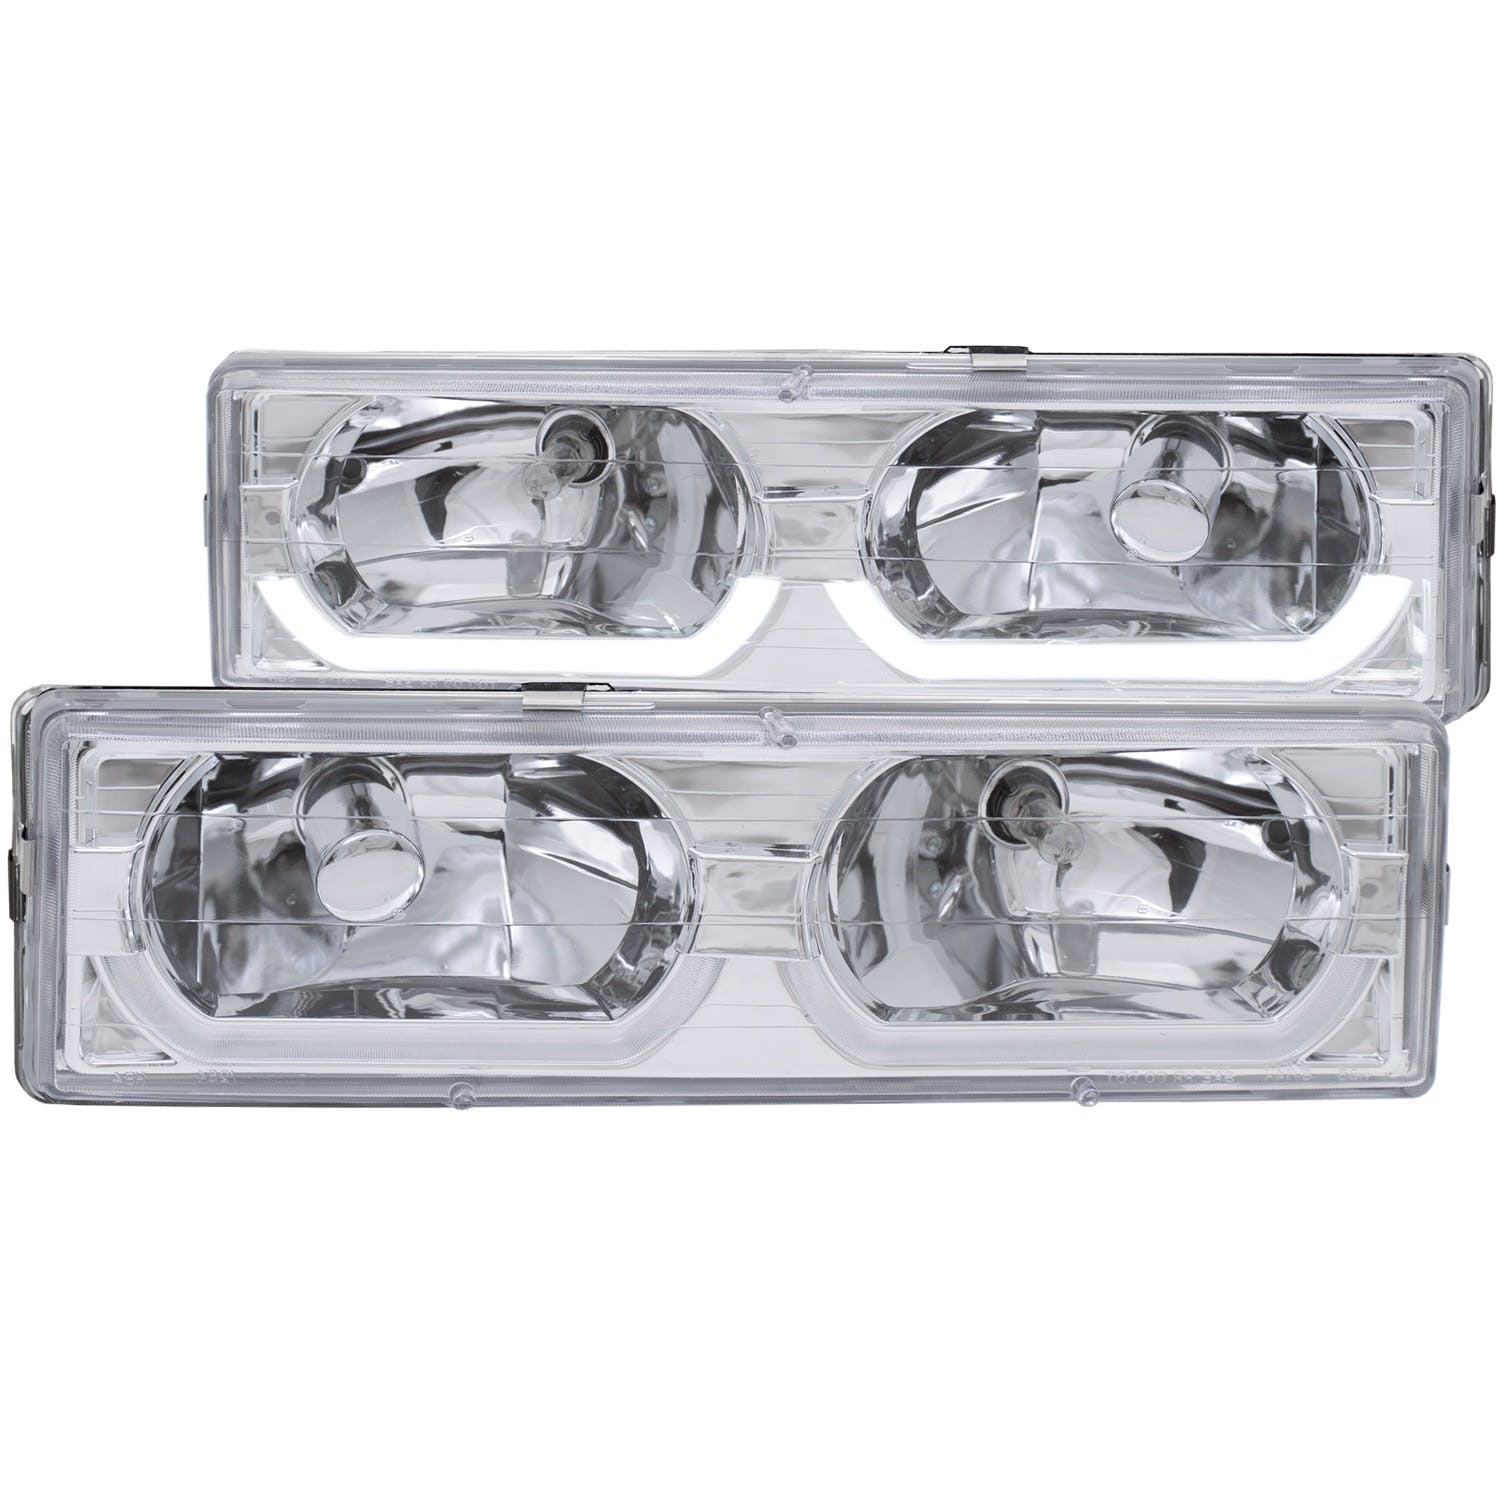 AnzoUSA 111300 Crystal Headlights Chrome with Low - Brow